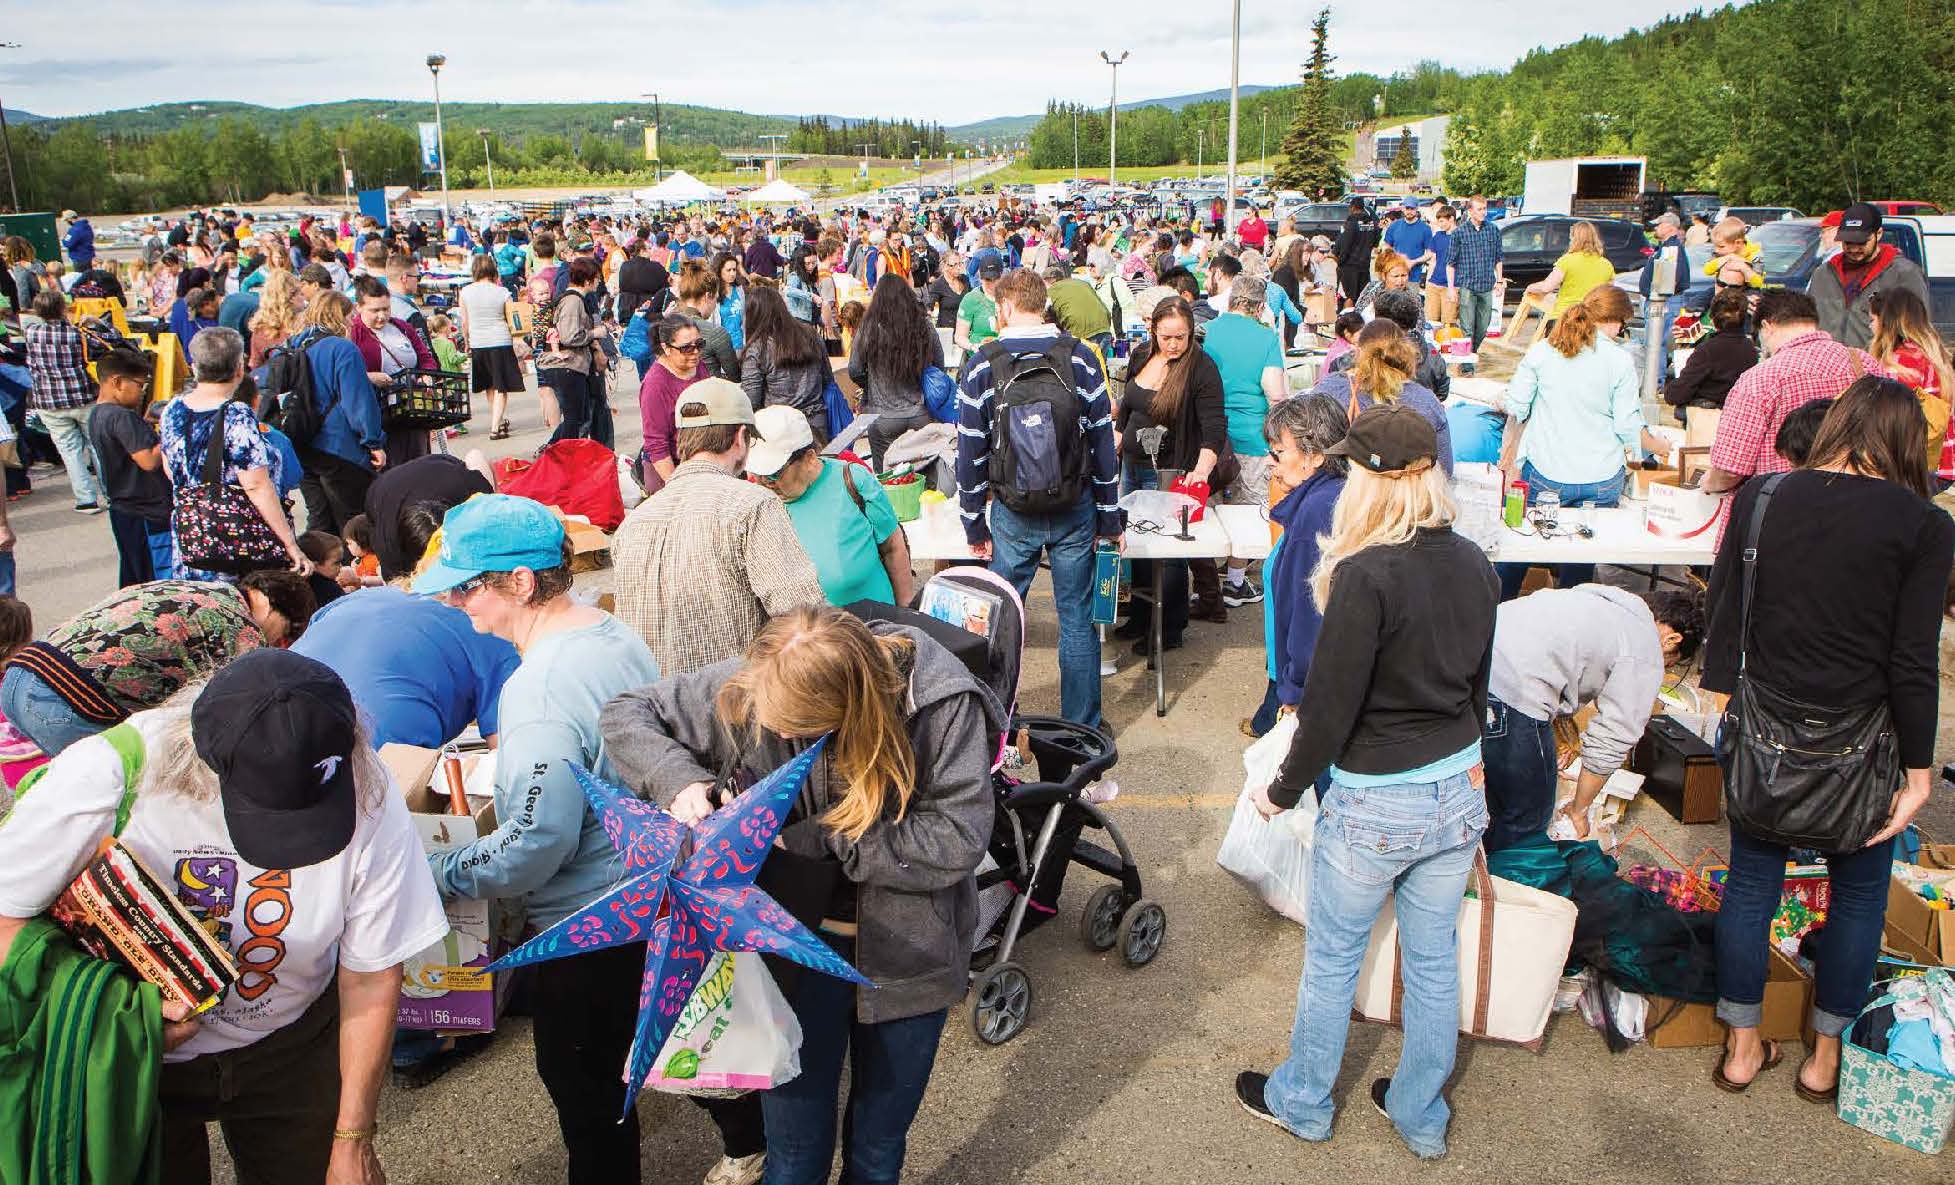 A crowd of people outdoors in a parking lot carrying and looking at miscellaneous stuff.